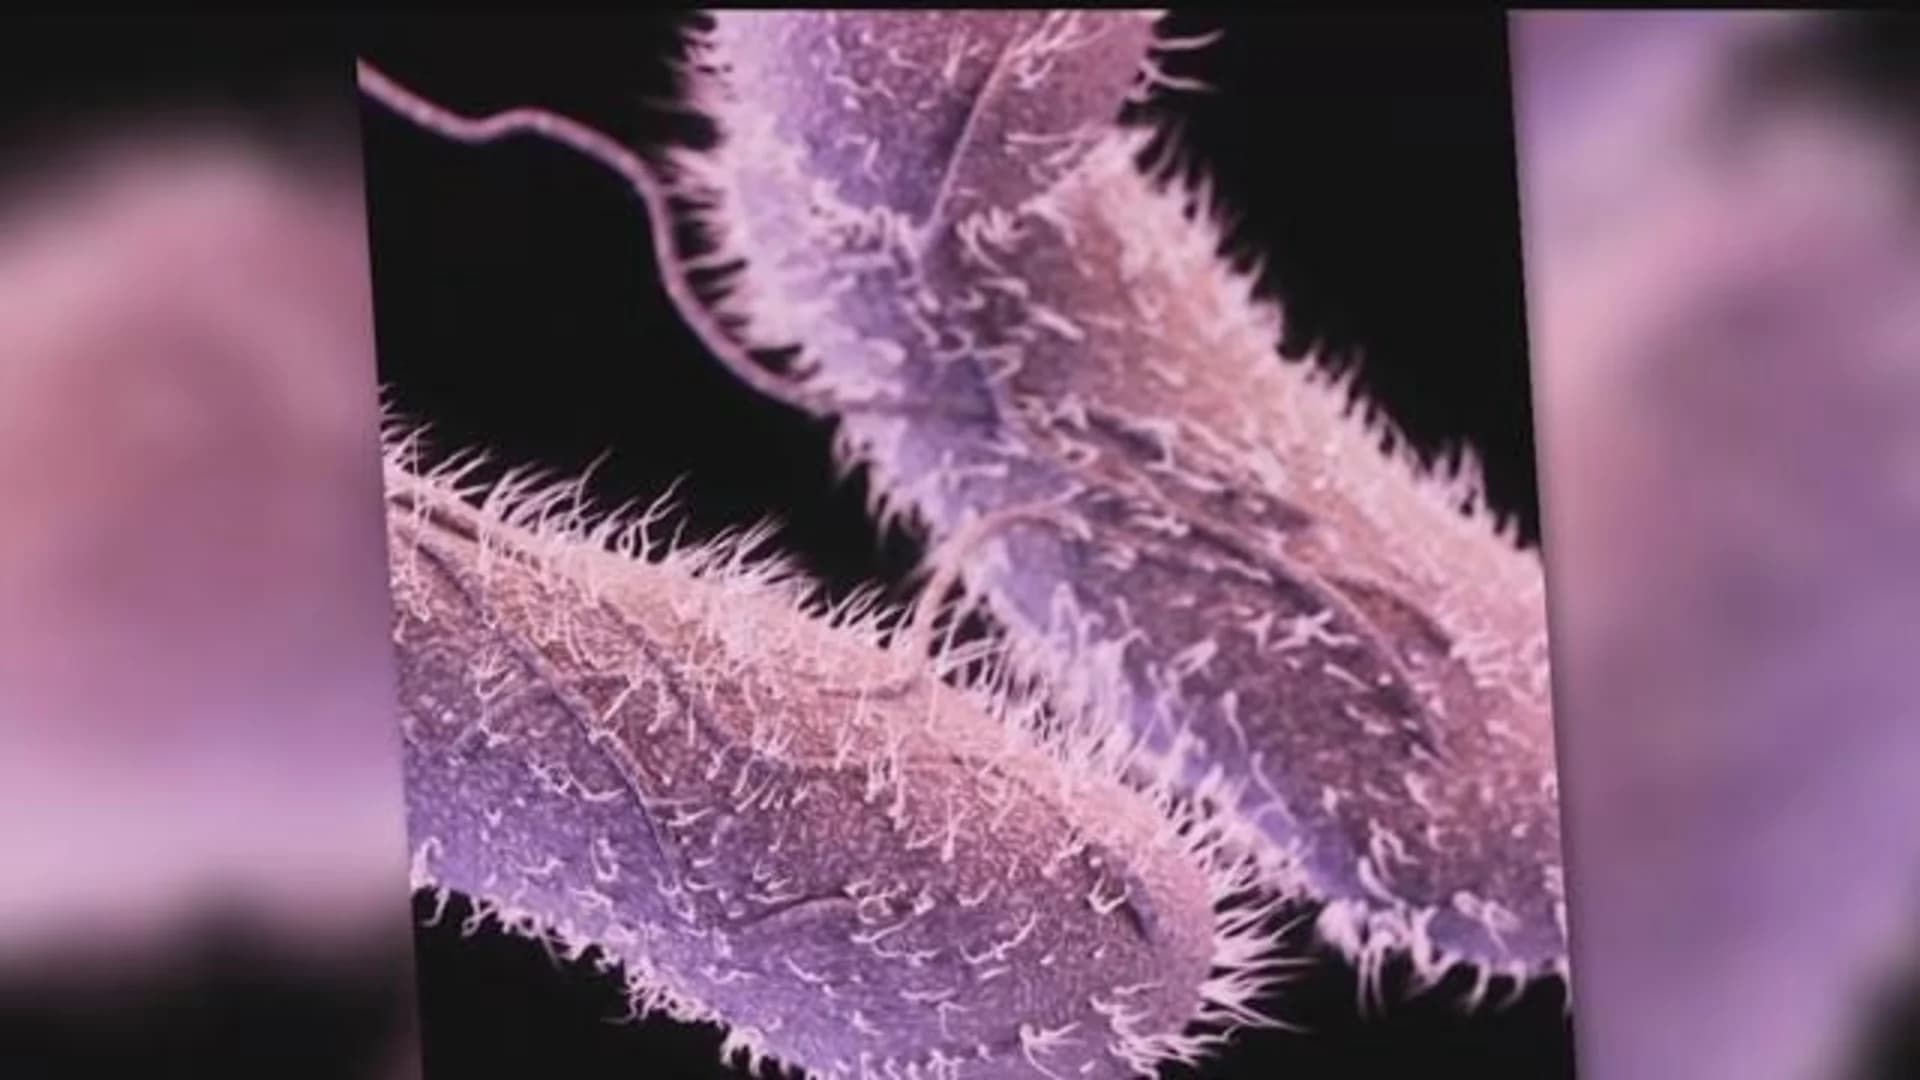 Effects of salmonella outbreak reach Connecticut